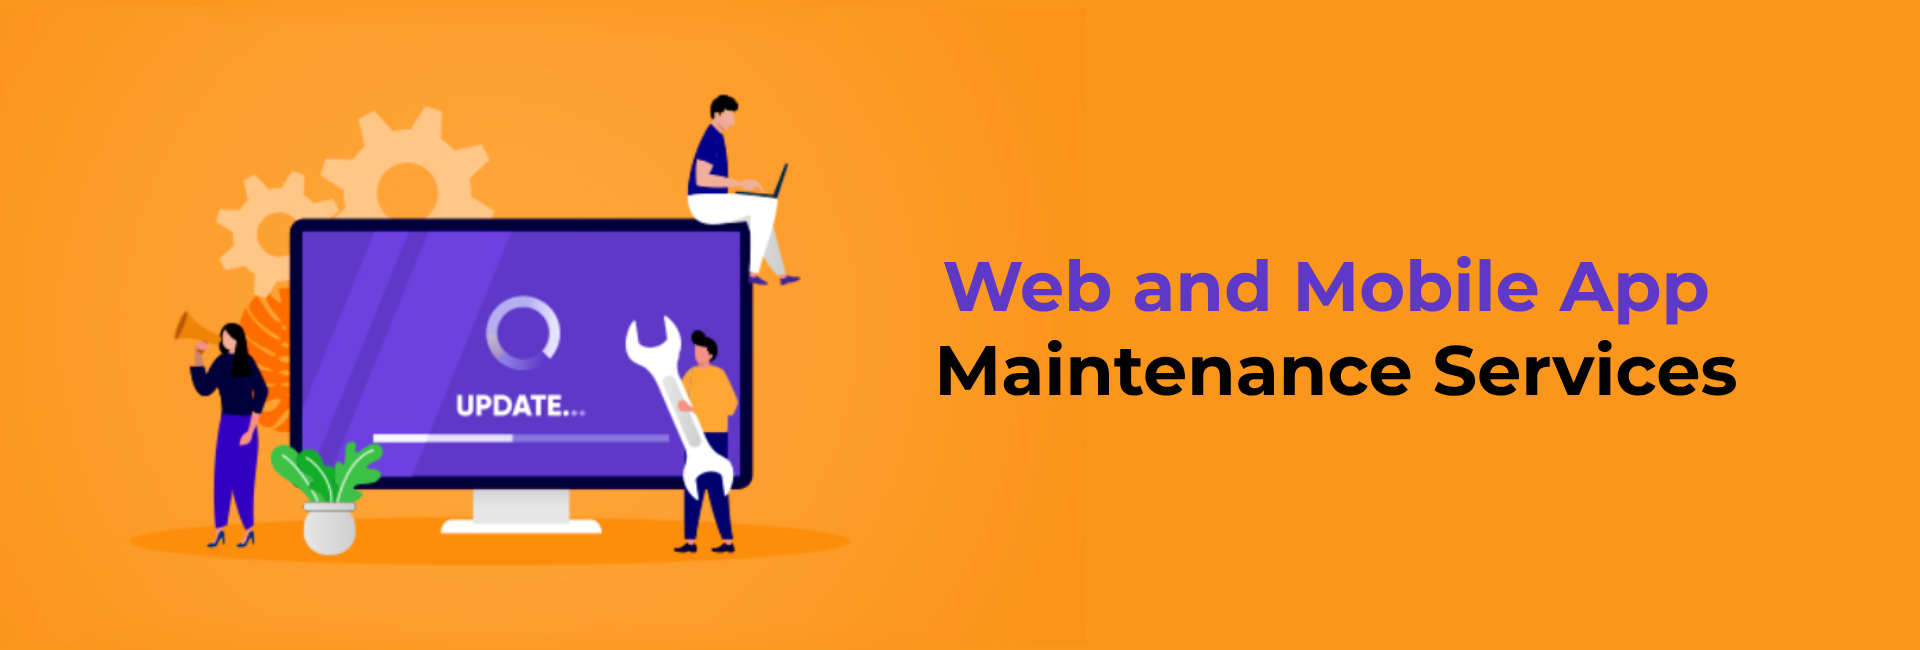 Image of Web and Mobile App  Maintenance Services